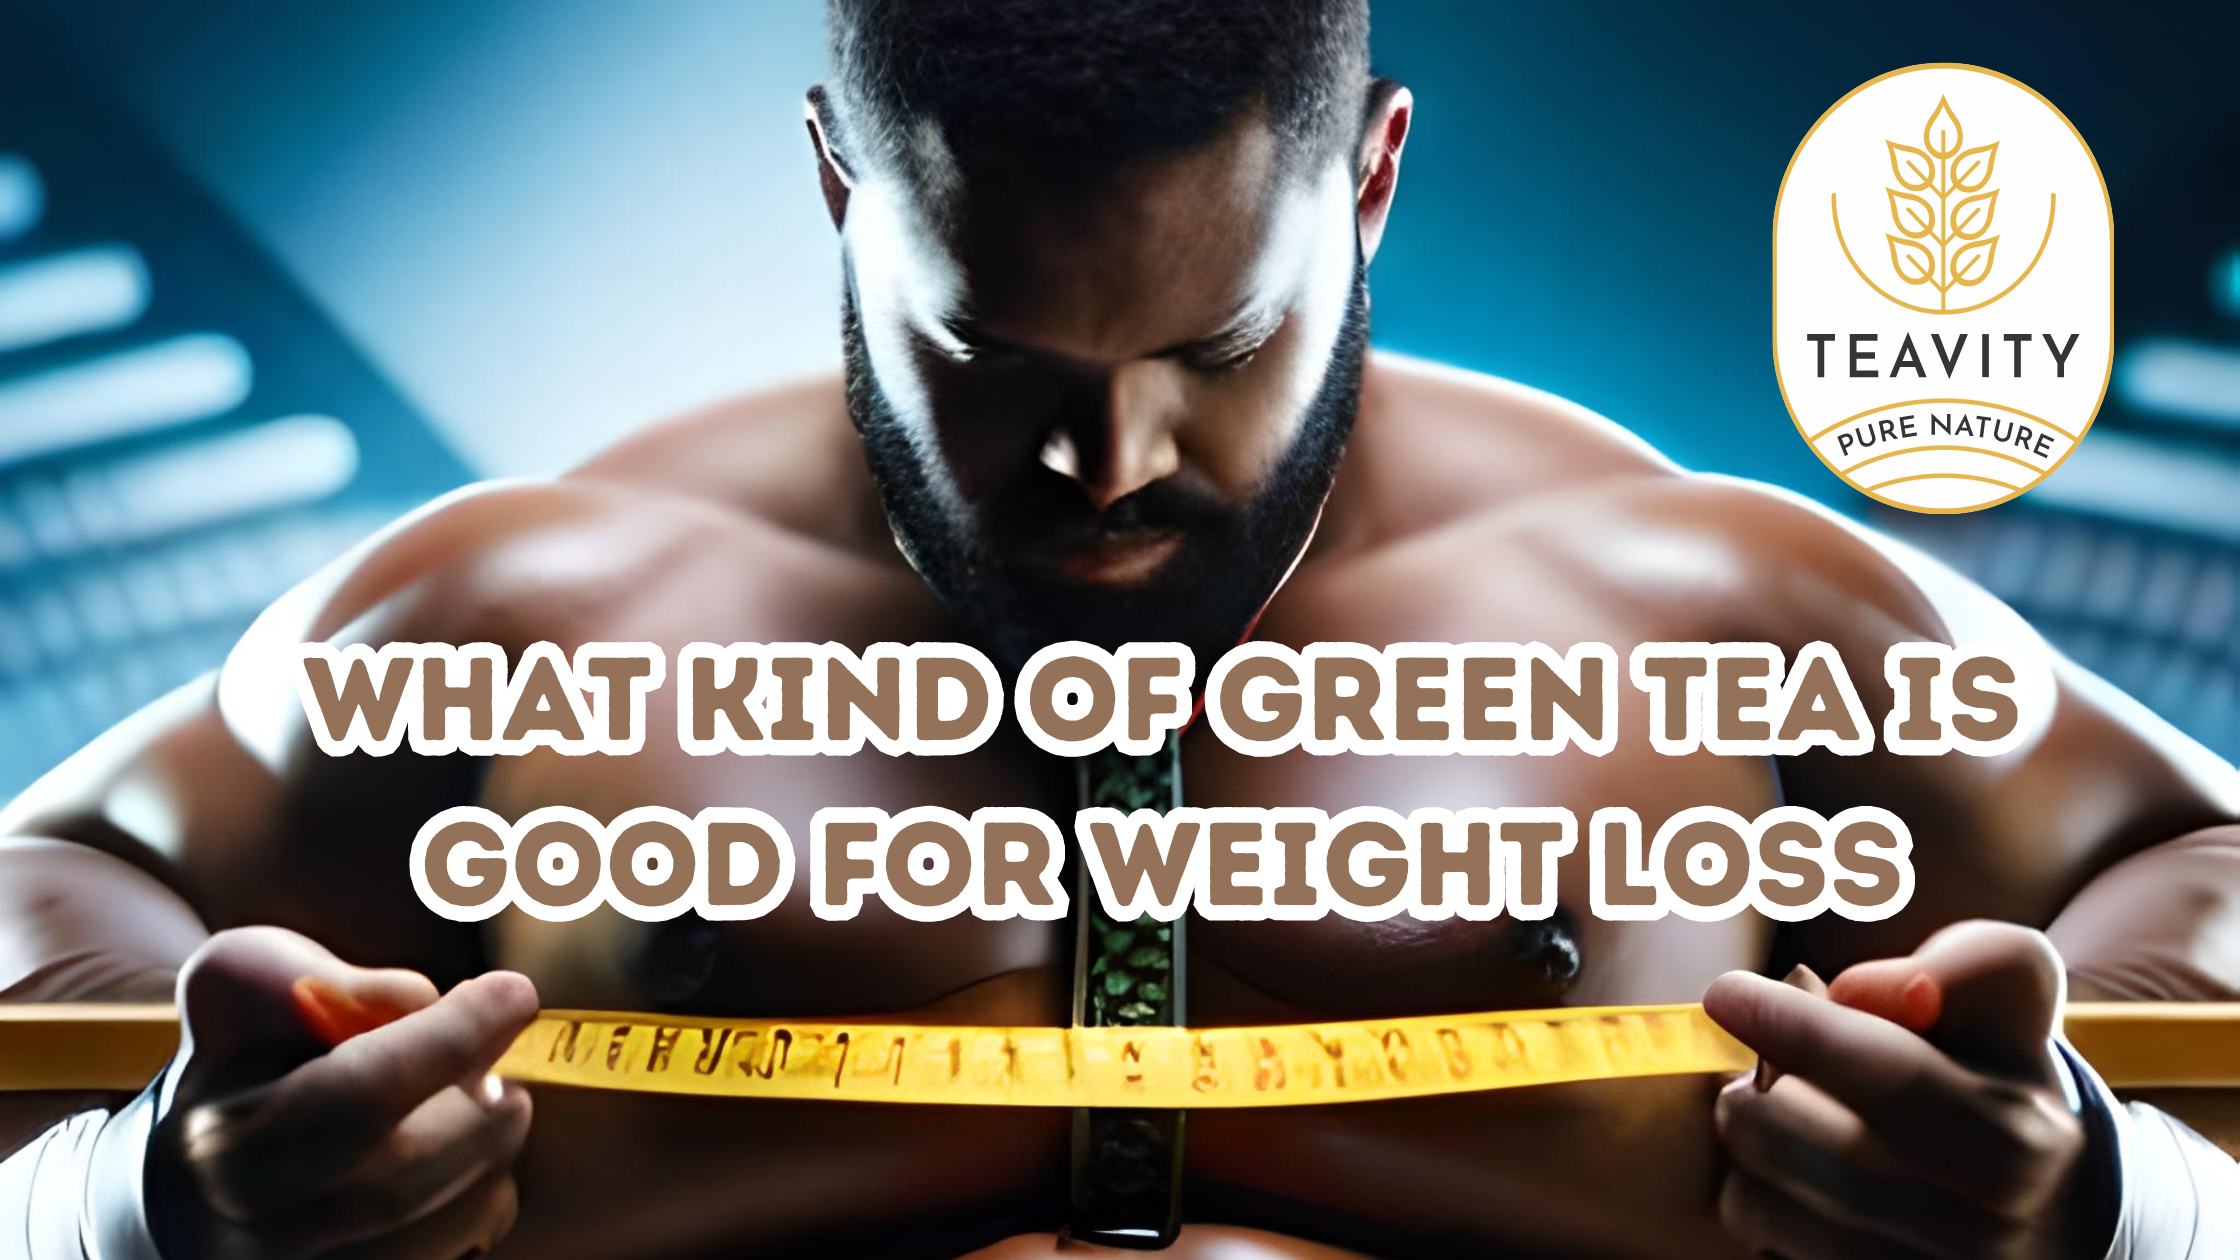 What Kind of Green Tea is Good for Weight Loss?